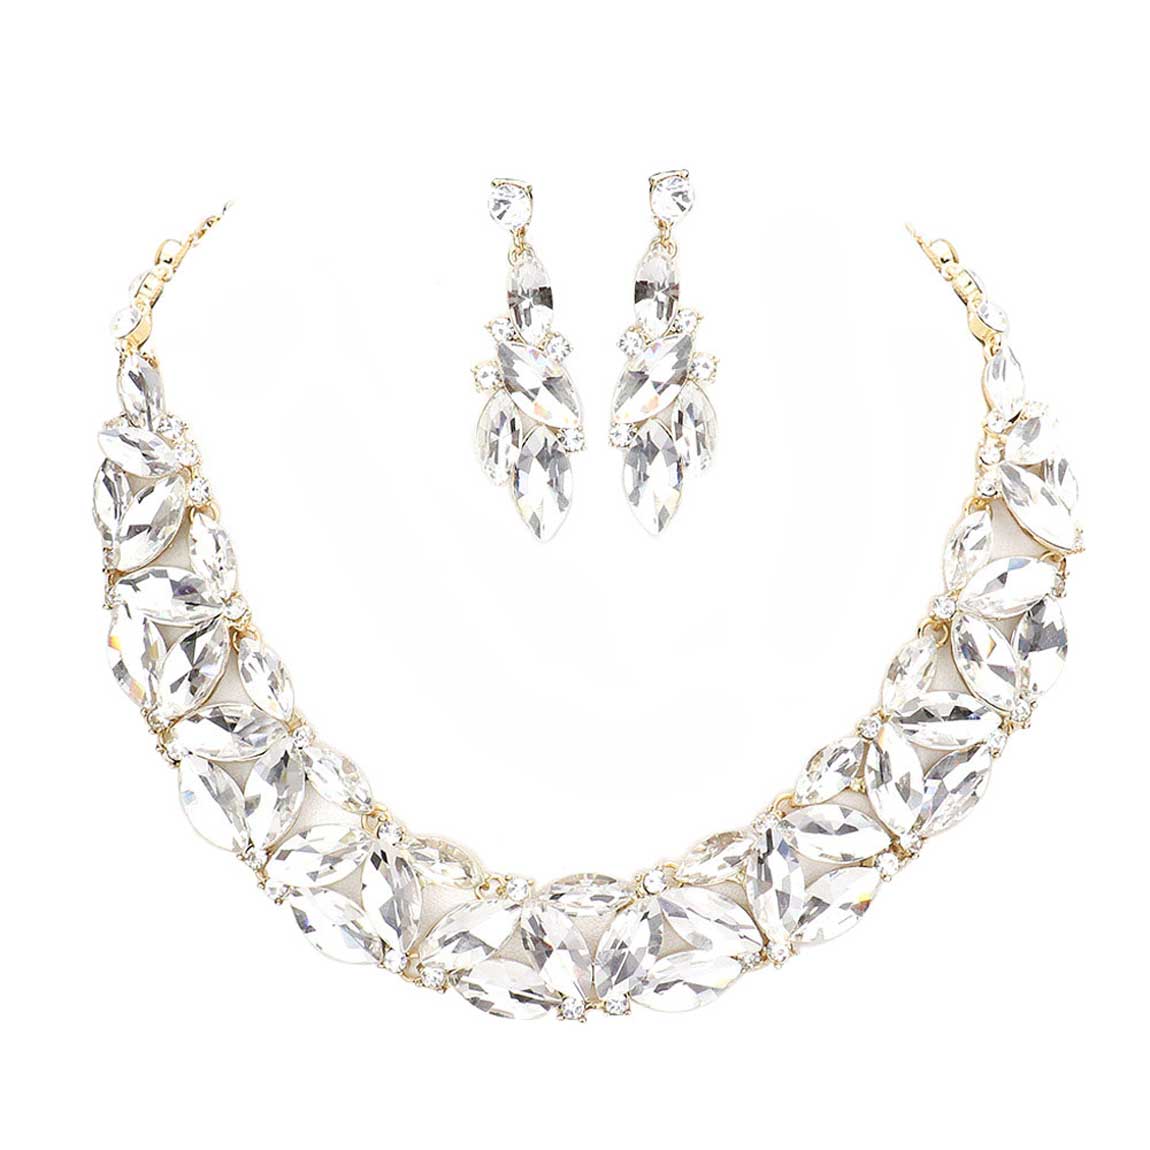 AB Gold Marquise Stone Cluster Evening Necklace. These gorgeous stone pieces will show your class in any special occasion. The elegance of these stone goes unmatched, great for wearing at a party! Perfect jewelry to enhance your look. Awesome gift for birthday, Anniversary, Valentine’s Day or any special occasion.